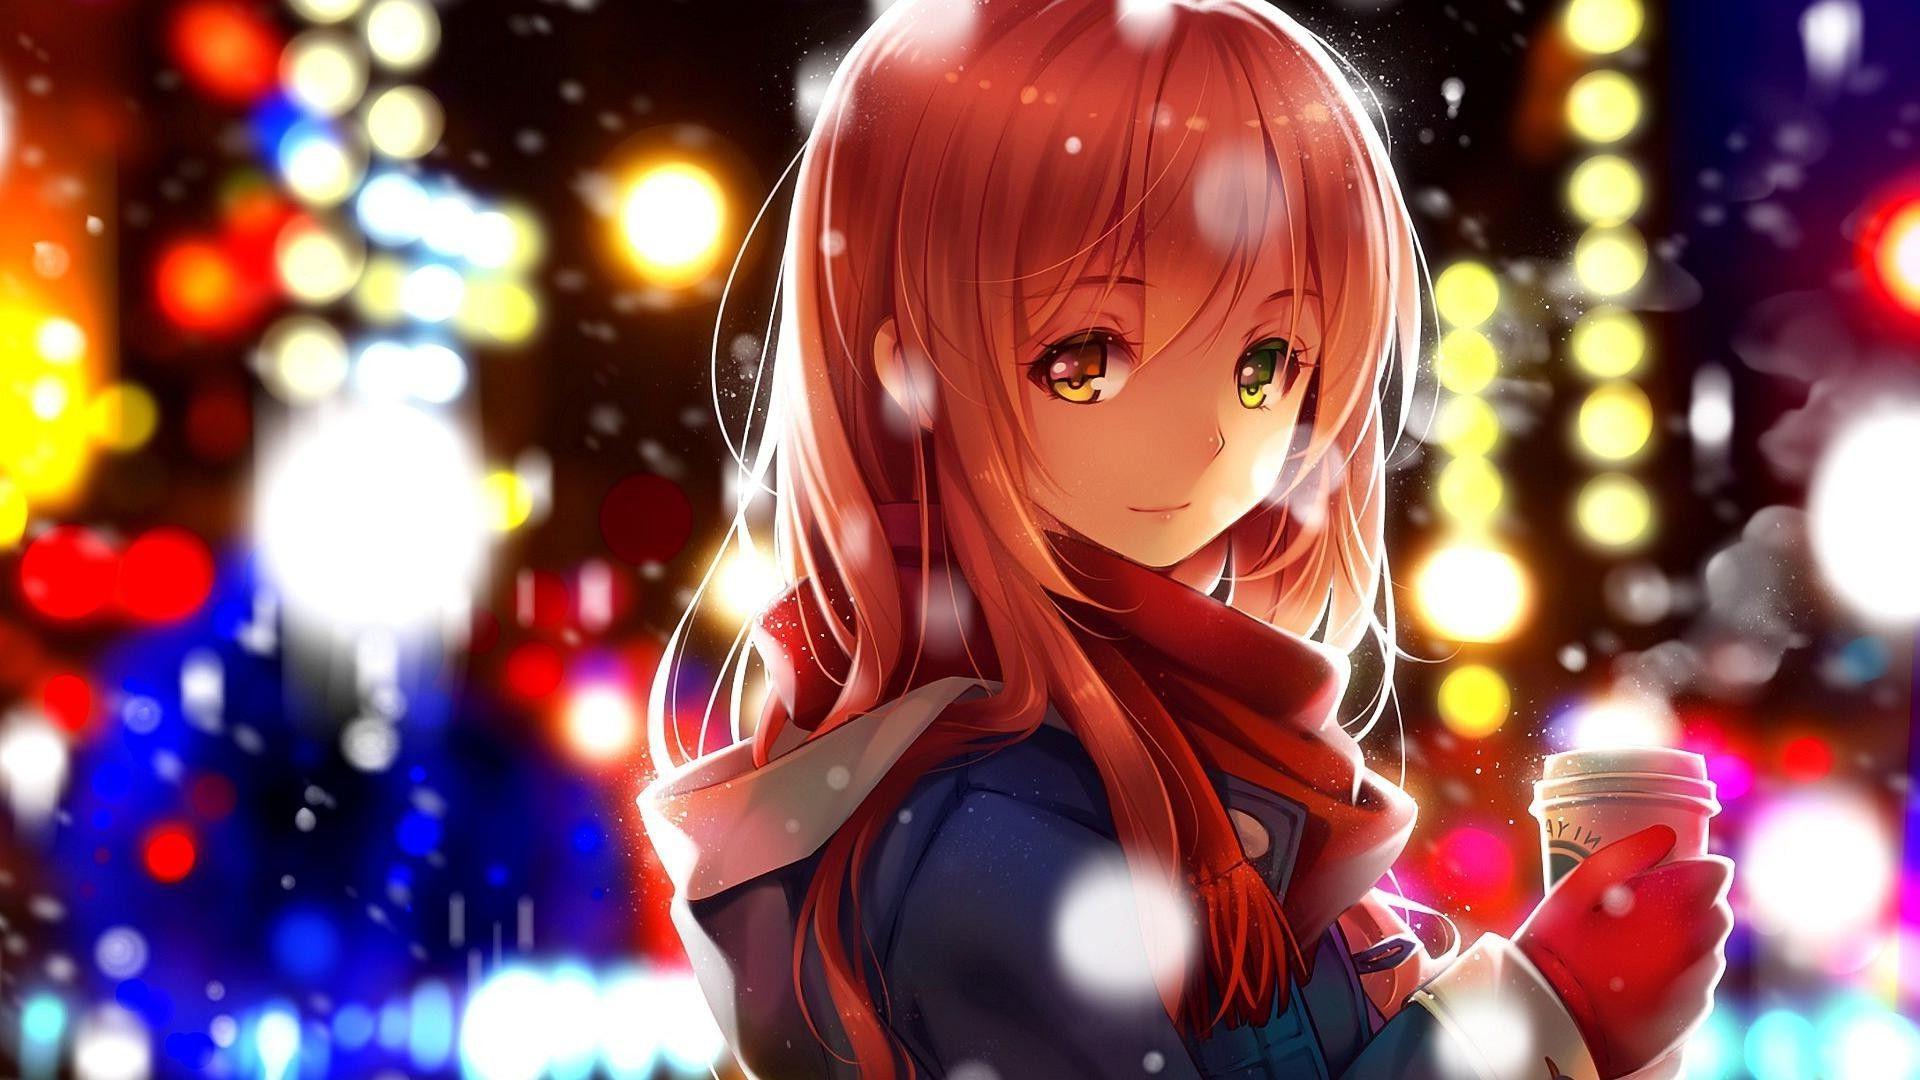 Anime Girls Hd Picture Background, Wallpapers Free Download